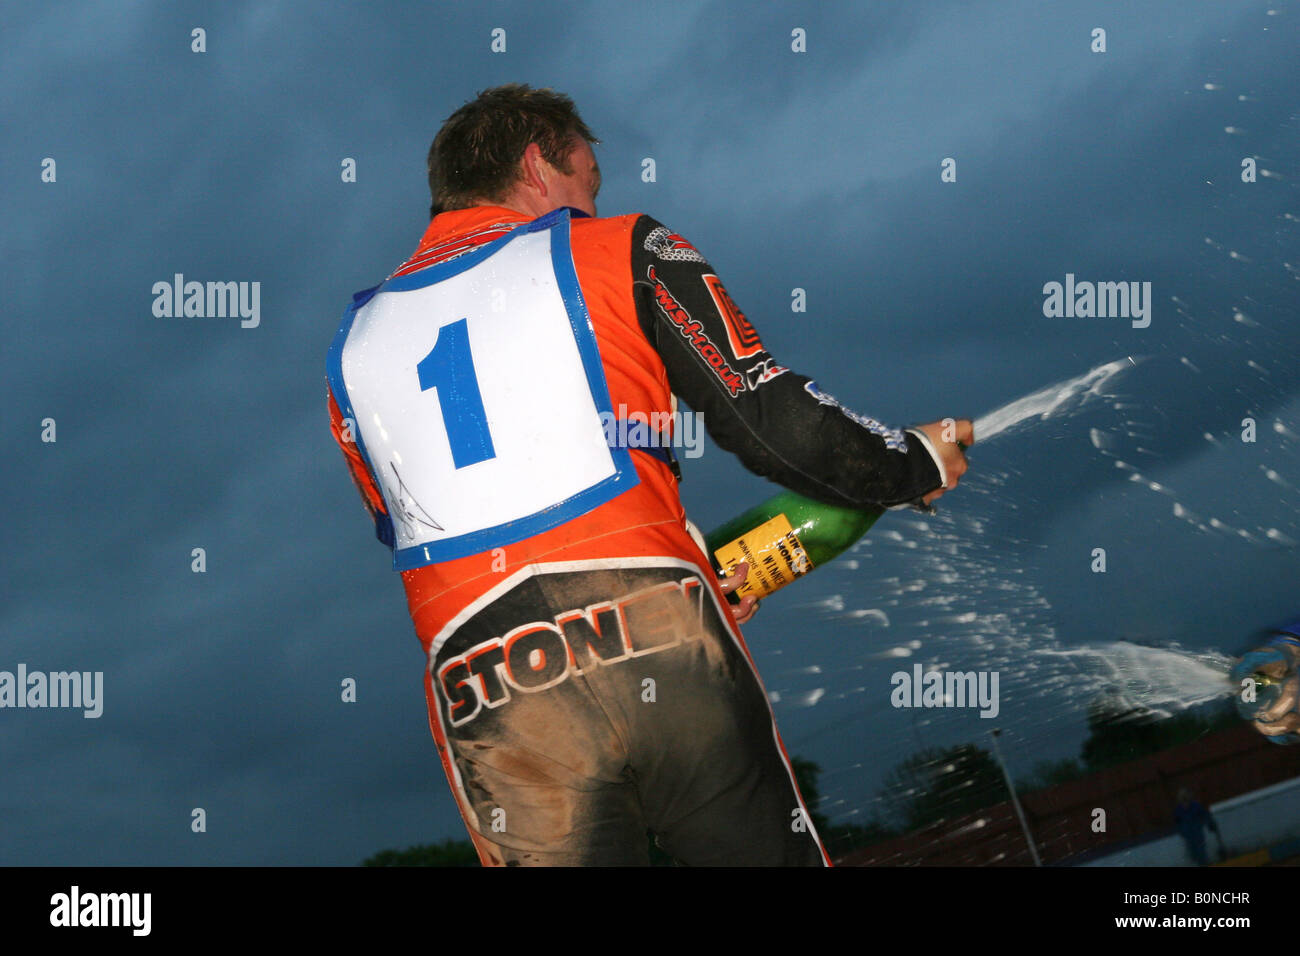 a speedway rider celebrates a victory by spraying champagne Stock Photo